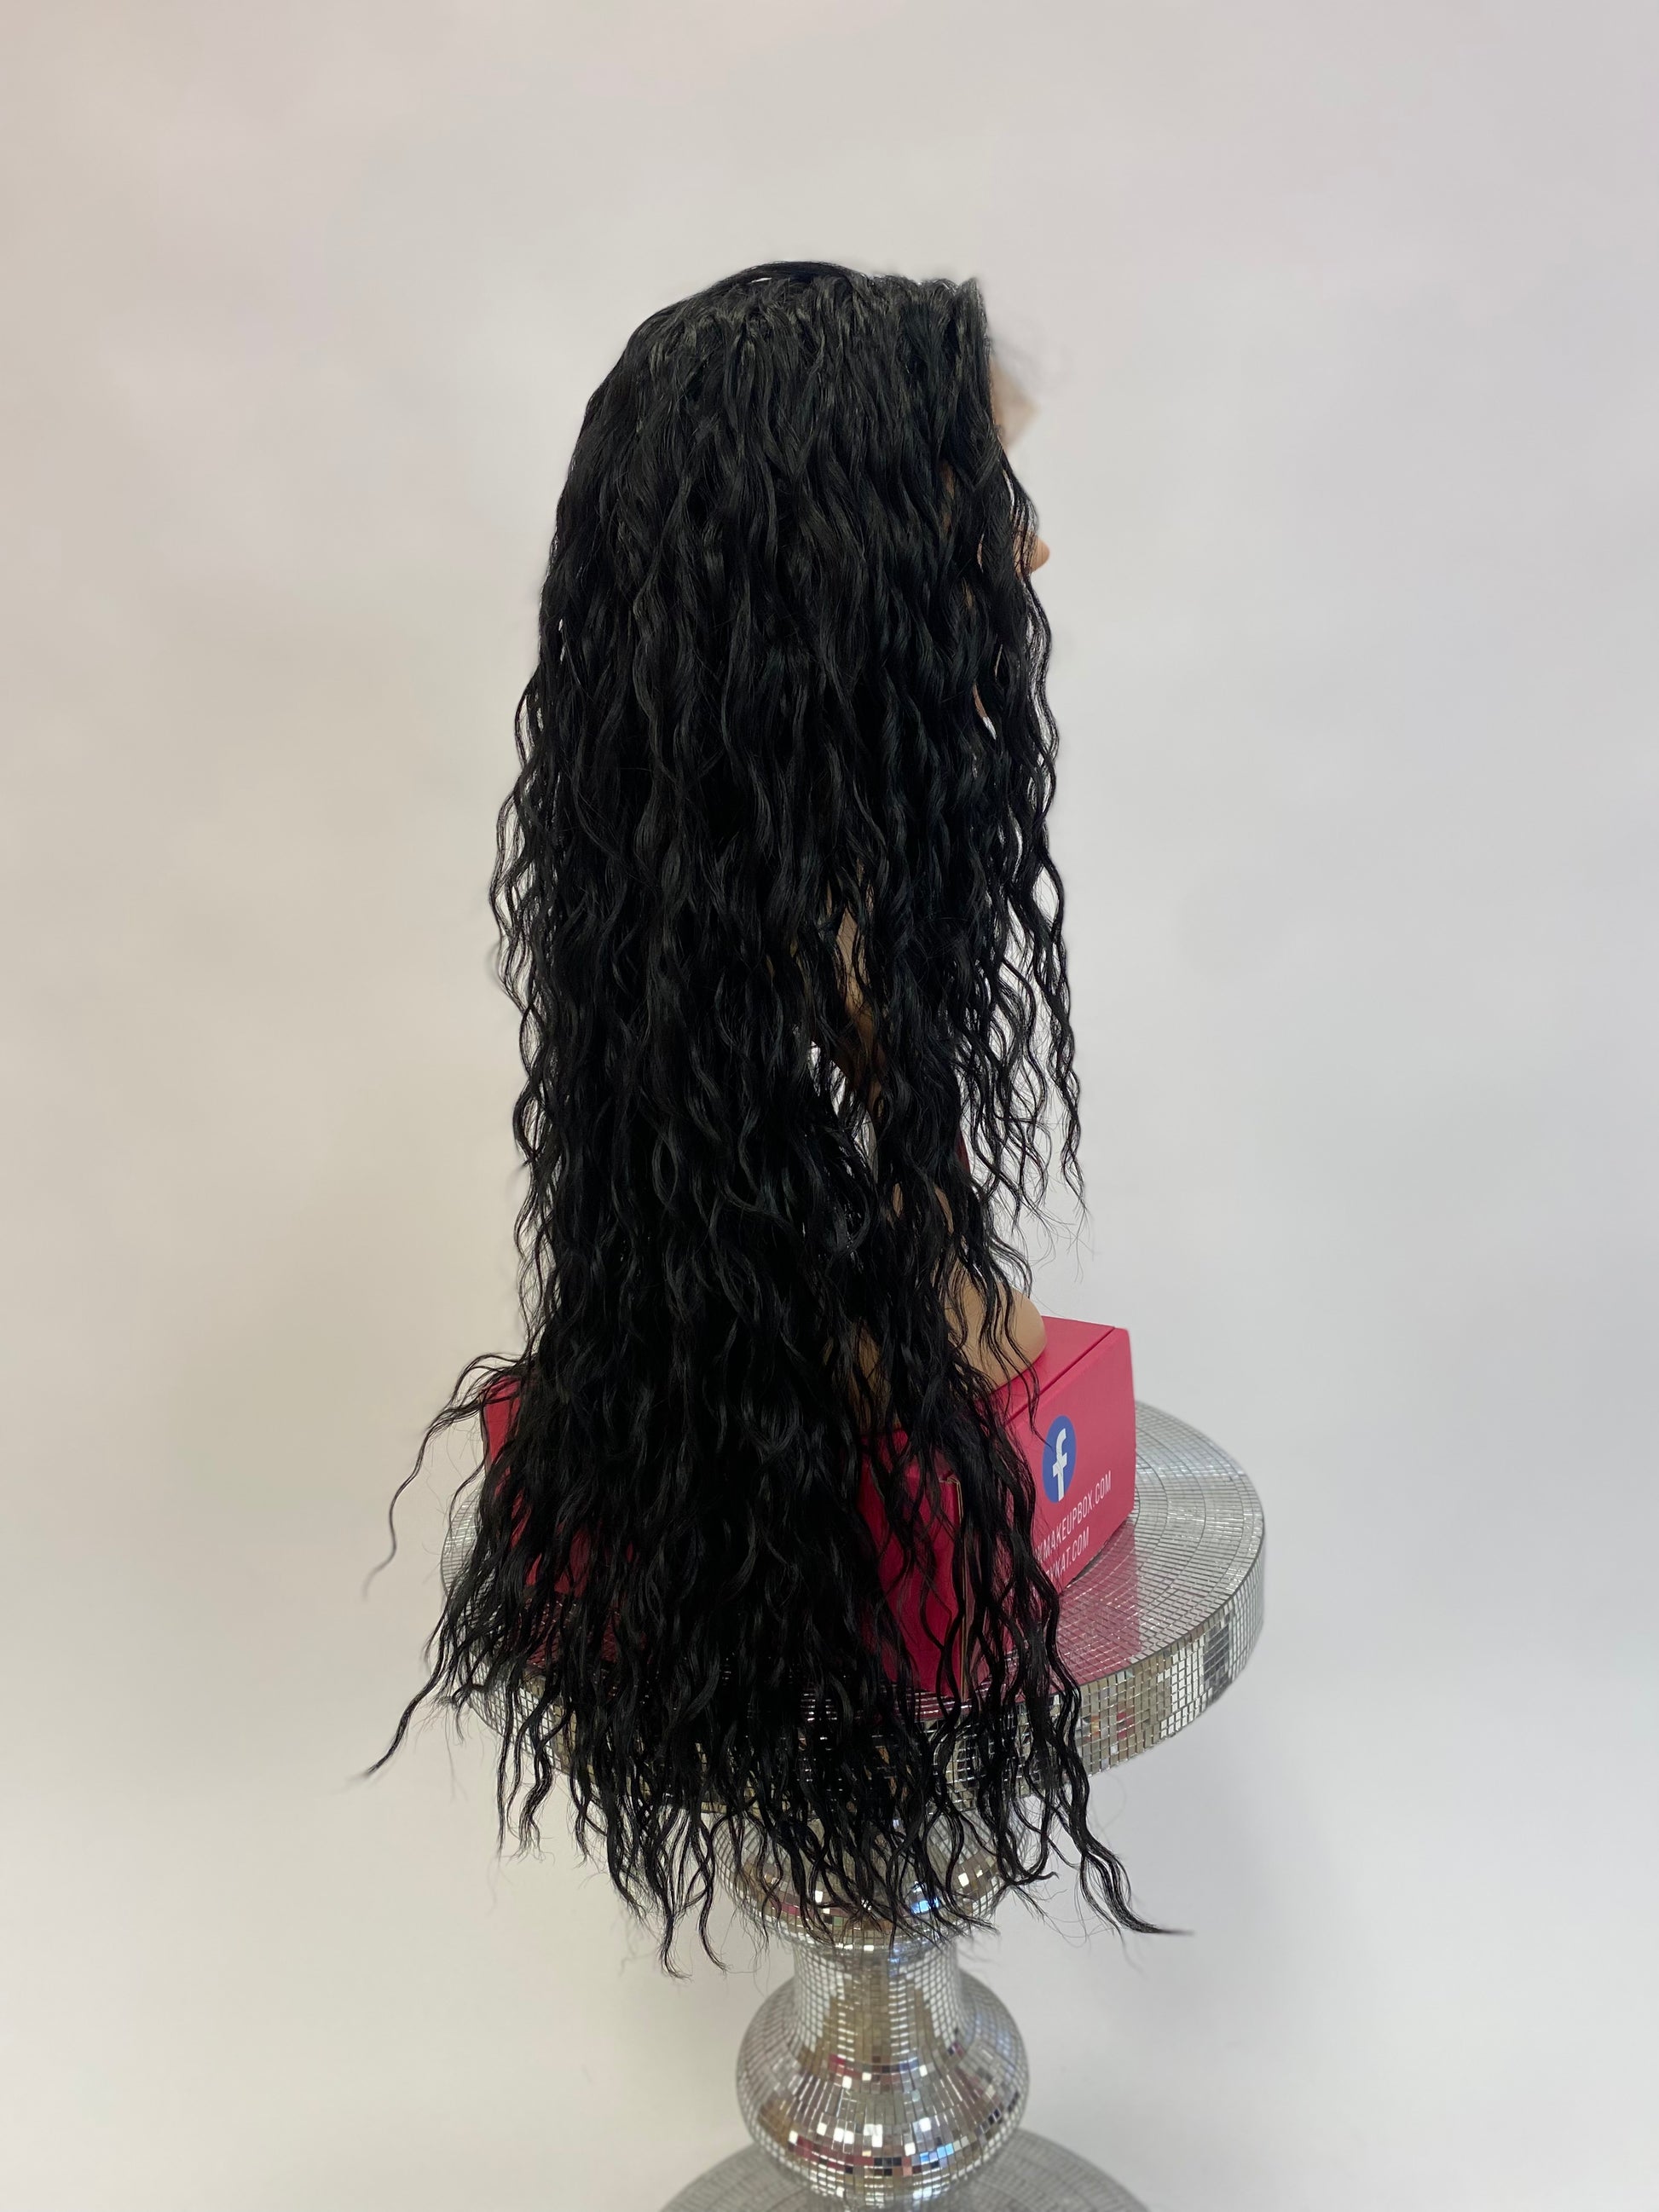 215 Erica - 13x4 Free Part Lace Front Wig - 1B - DaizyKat Cosmetics 215 Erica - 13x4 Free Part Lace Front Wig - 1B DaizyKat Cosmetics Wigs